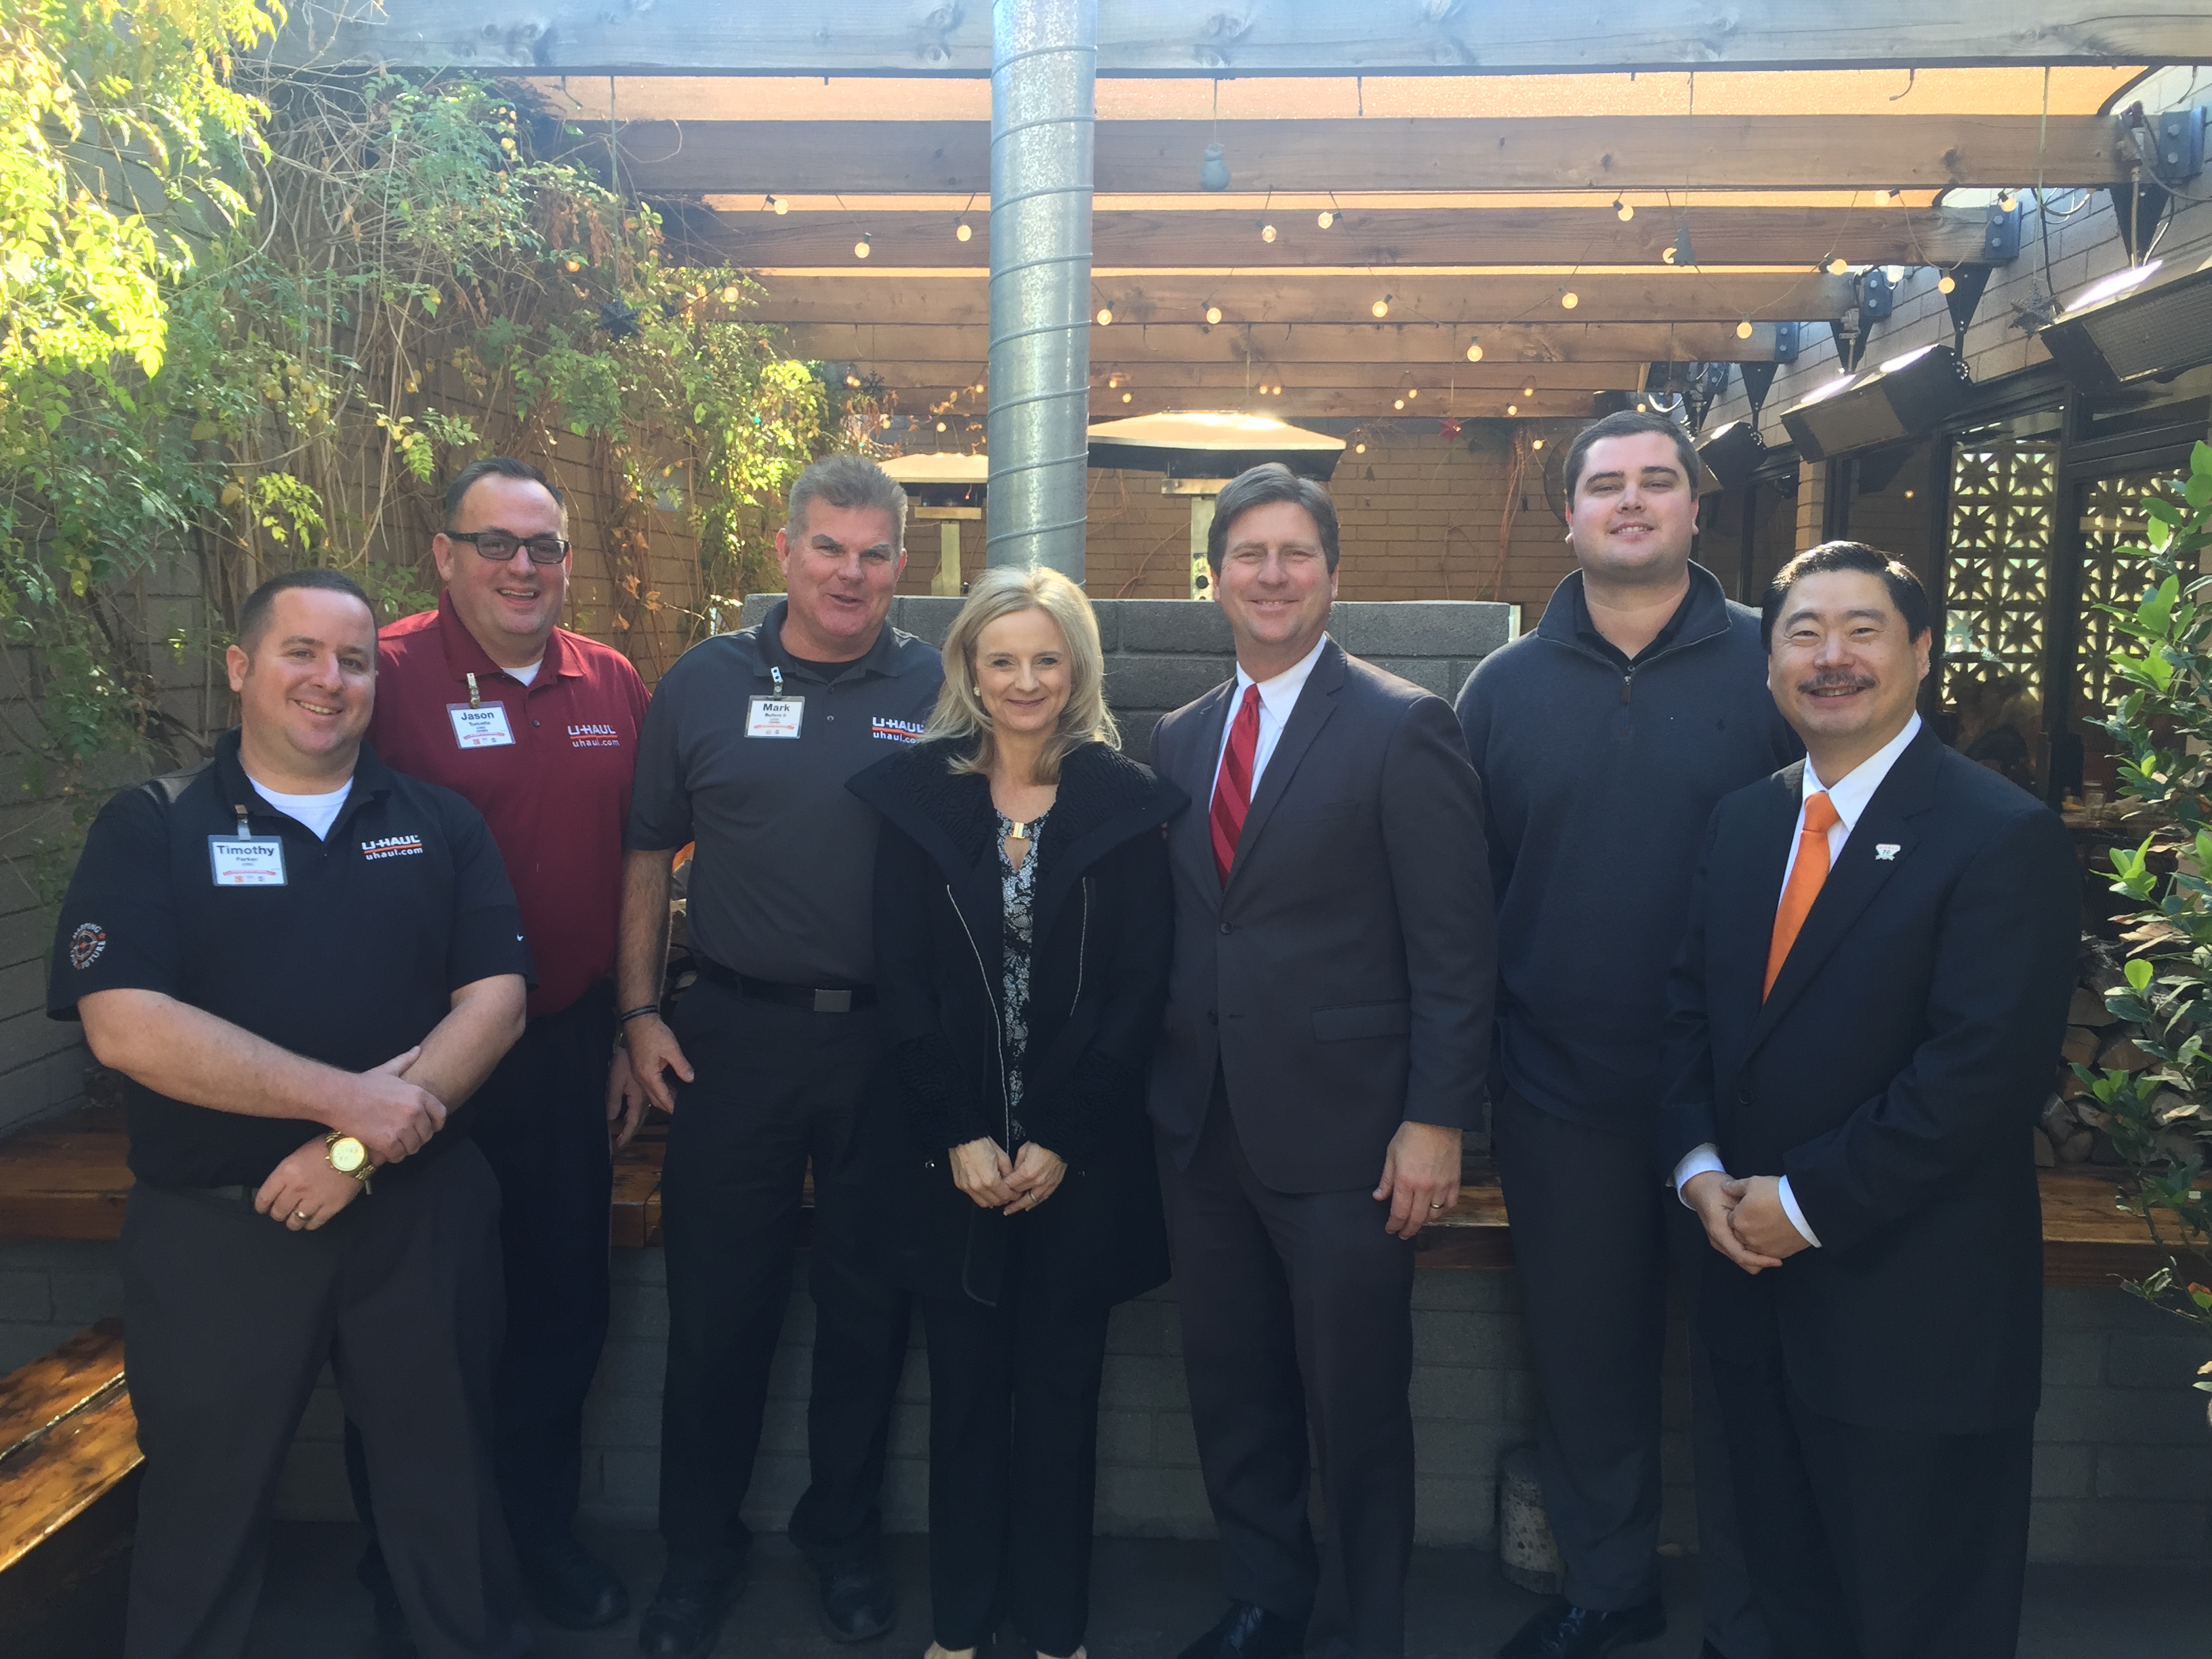 Phoenix Mayor Greg Stanton and his wife Nicole, center, have lunch with U-Haul marketing company presidents and Dr. Allan Yang at The Parlor